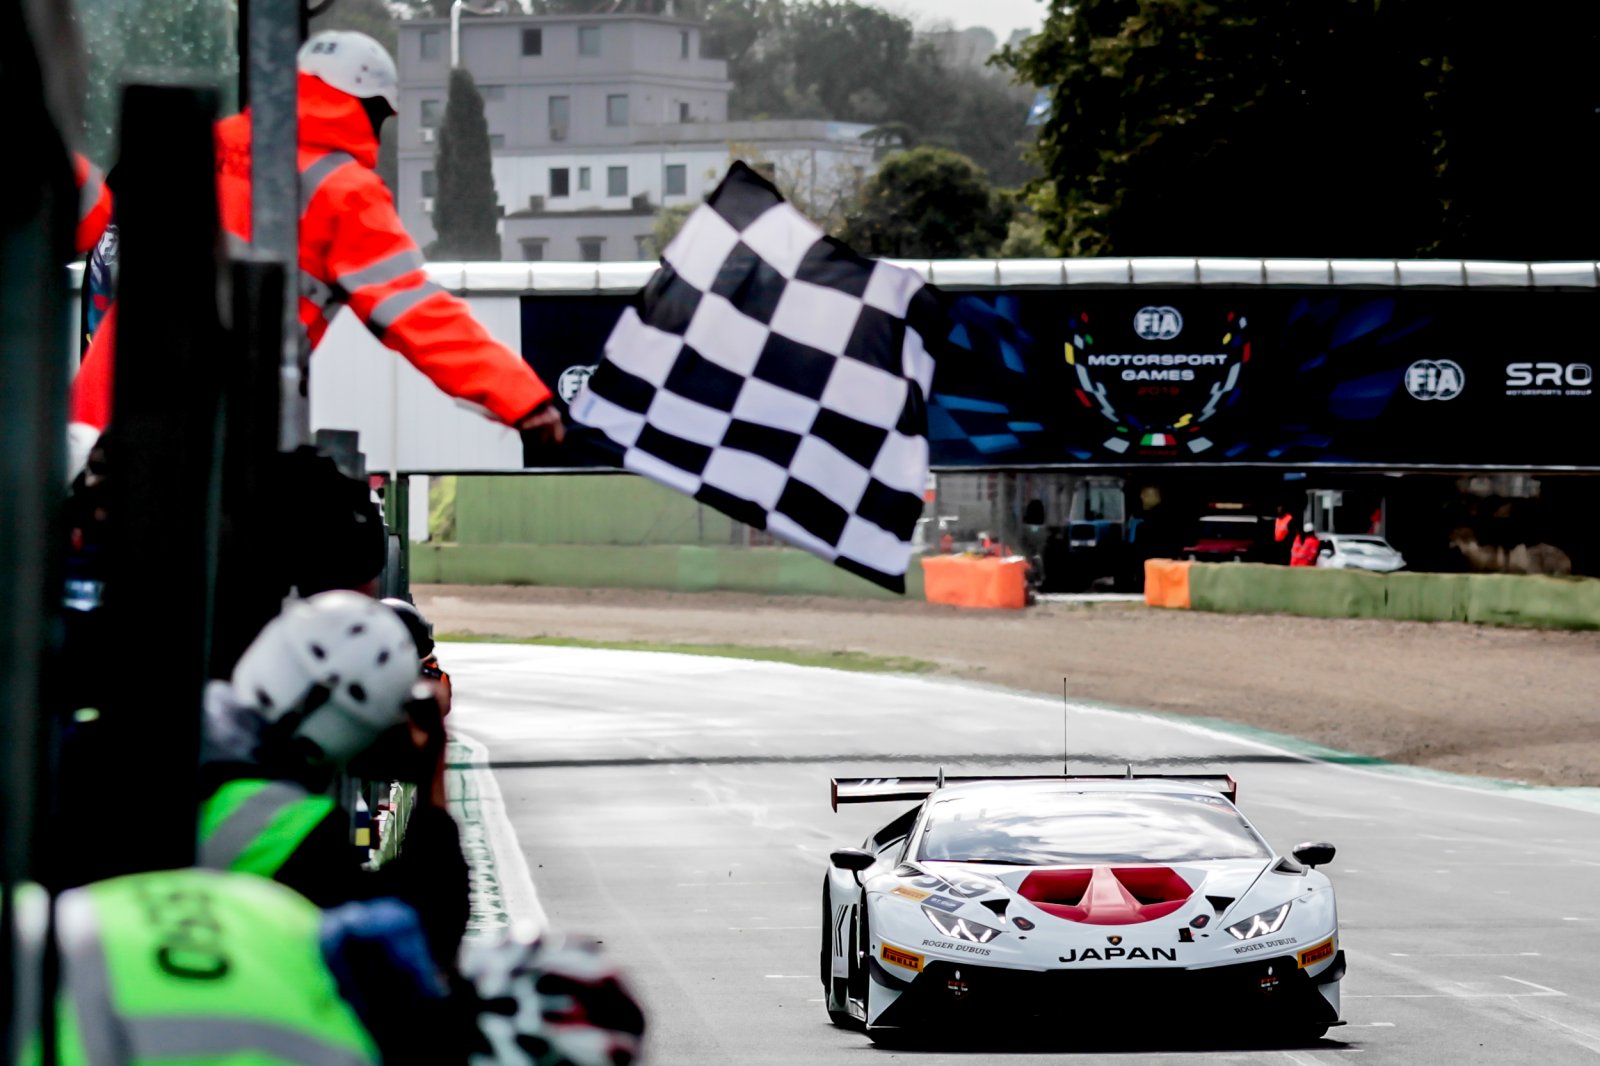 Japan takes race 2 victory at Vallelunga, Poland on provisional pole for medal showdown